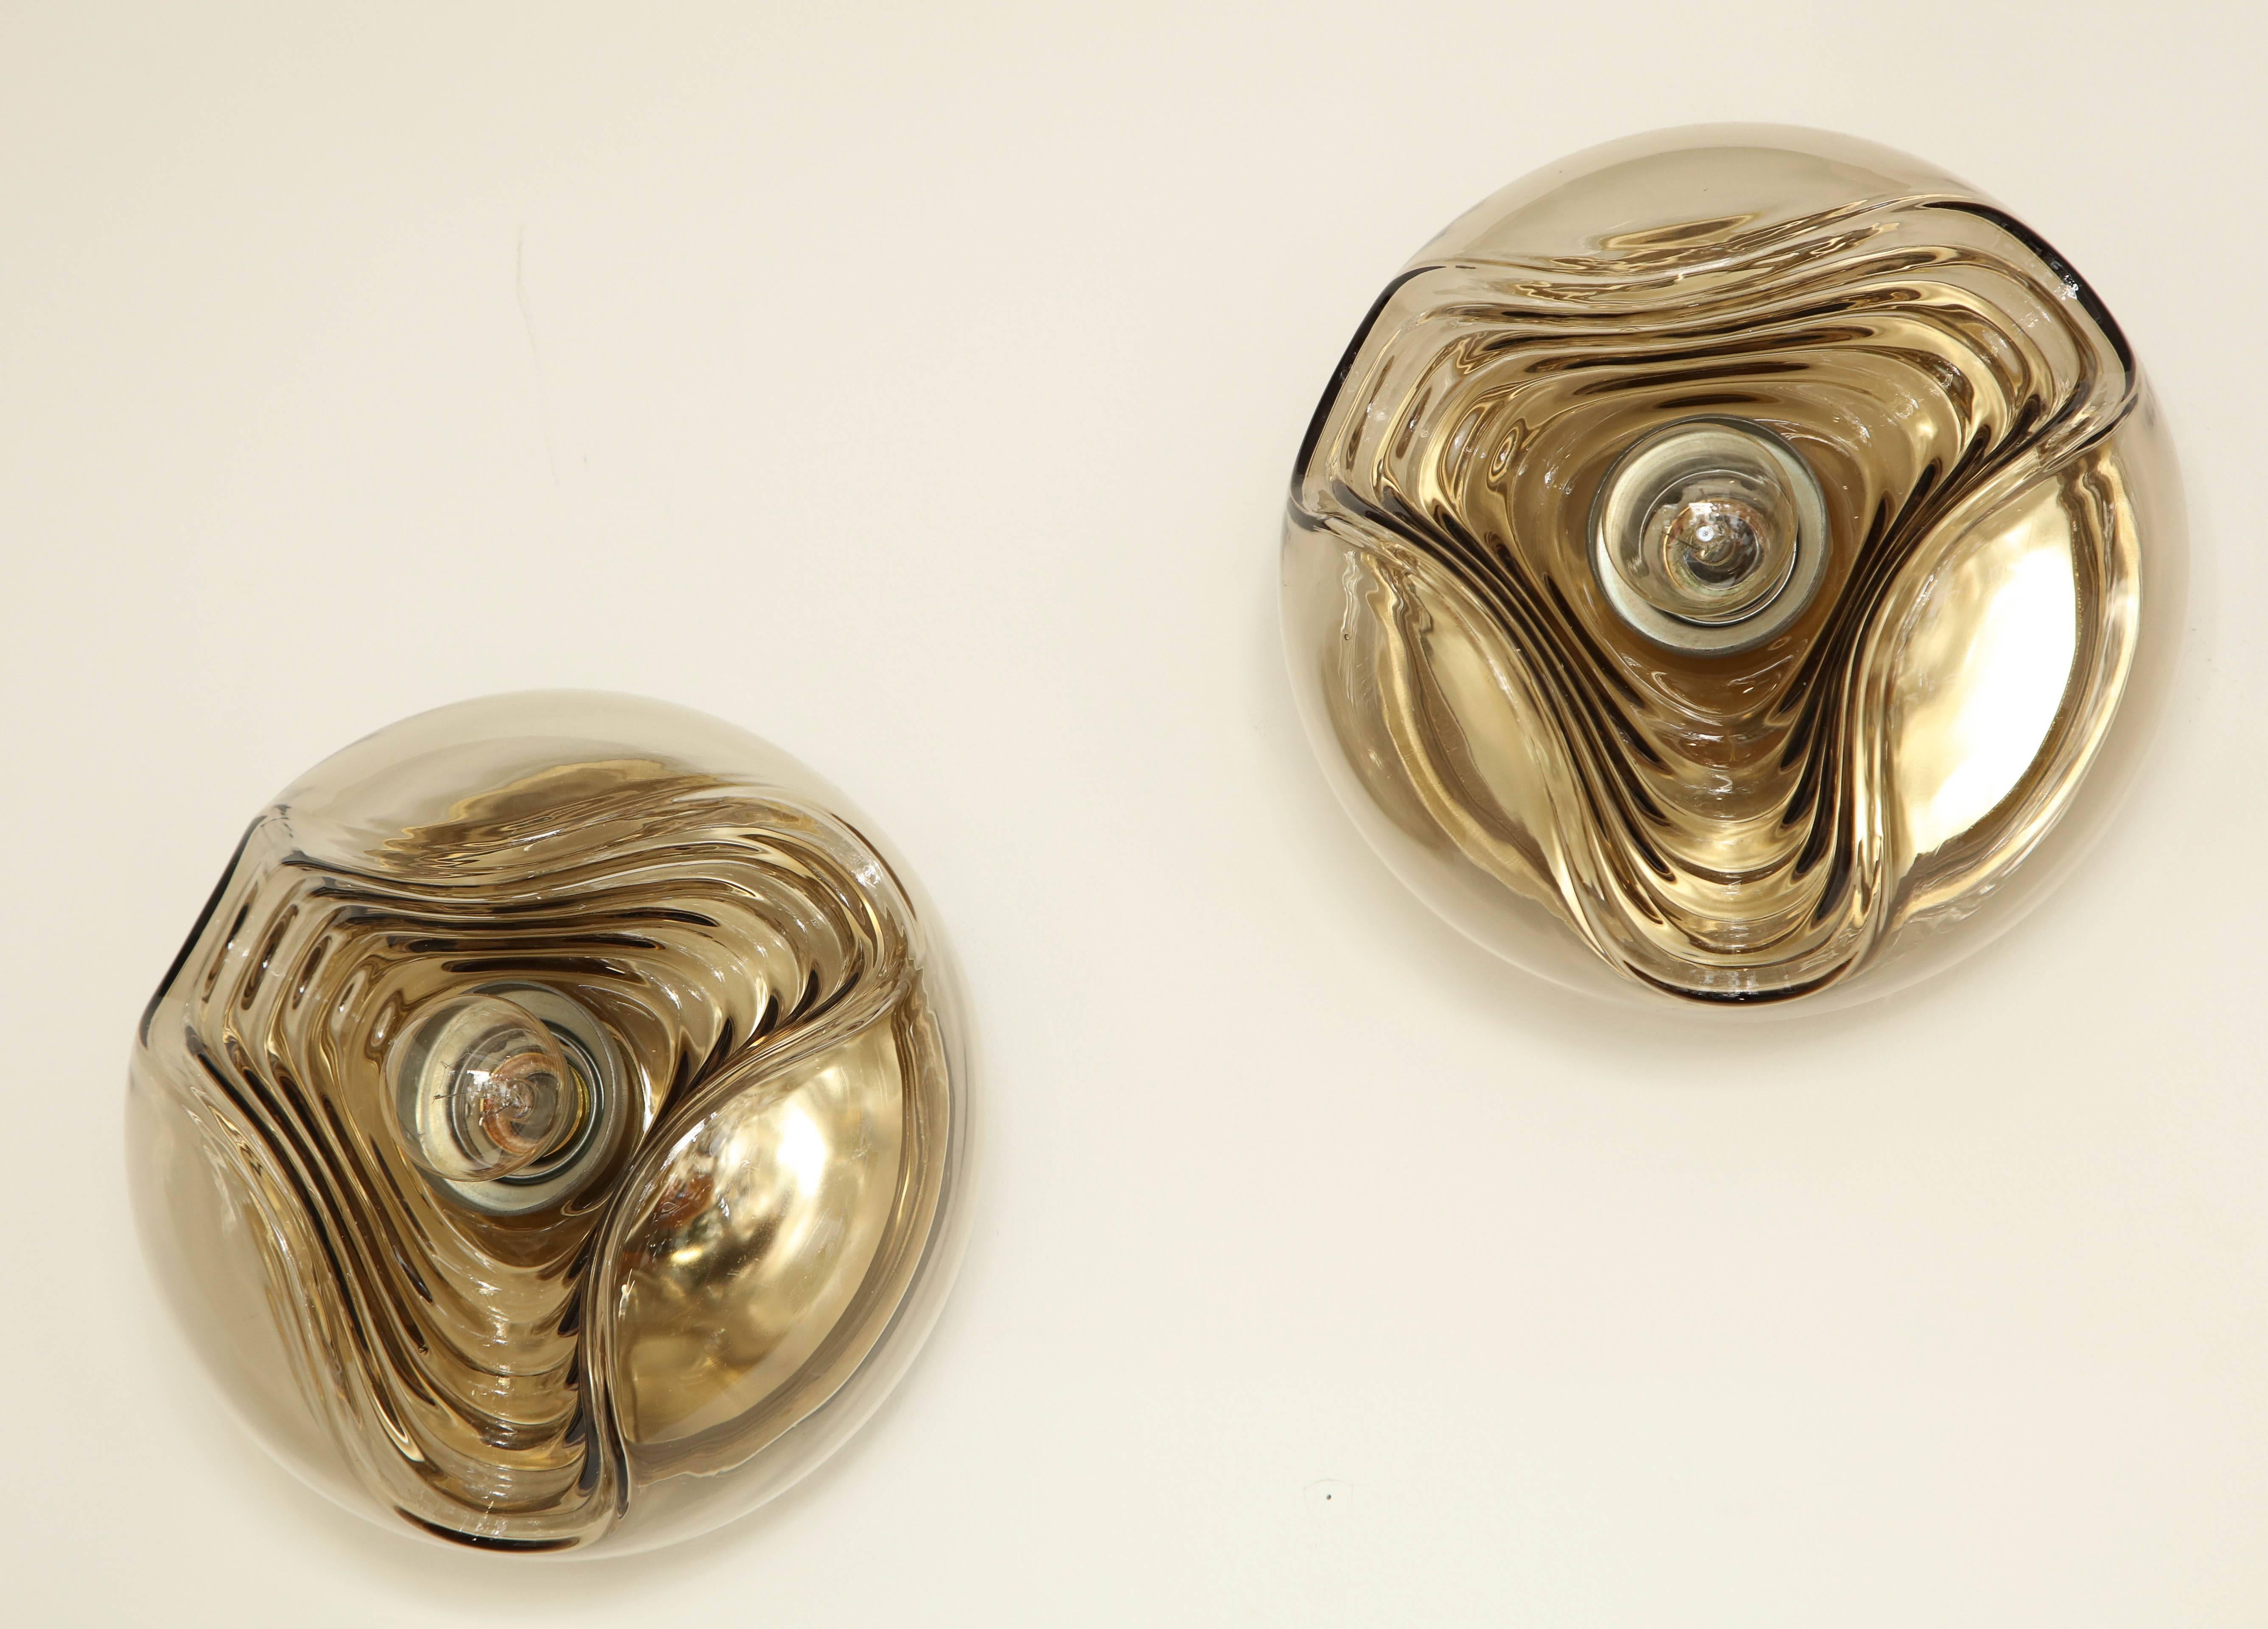 Wonderful pair of modernist Space Age smoked glass sconces by Peill and Putzler.
The sconces have been newly rewired for the US with a single light source.